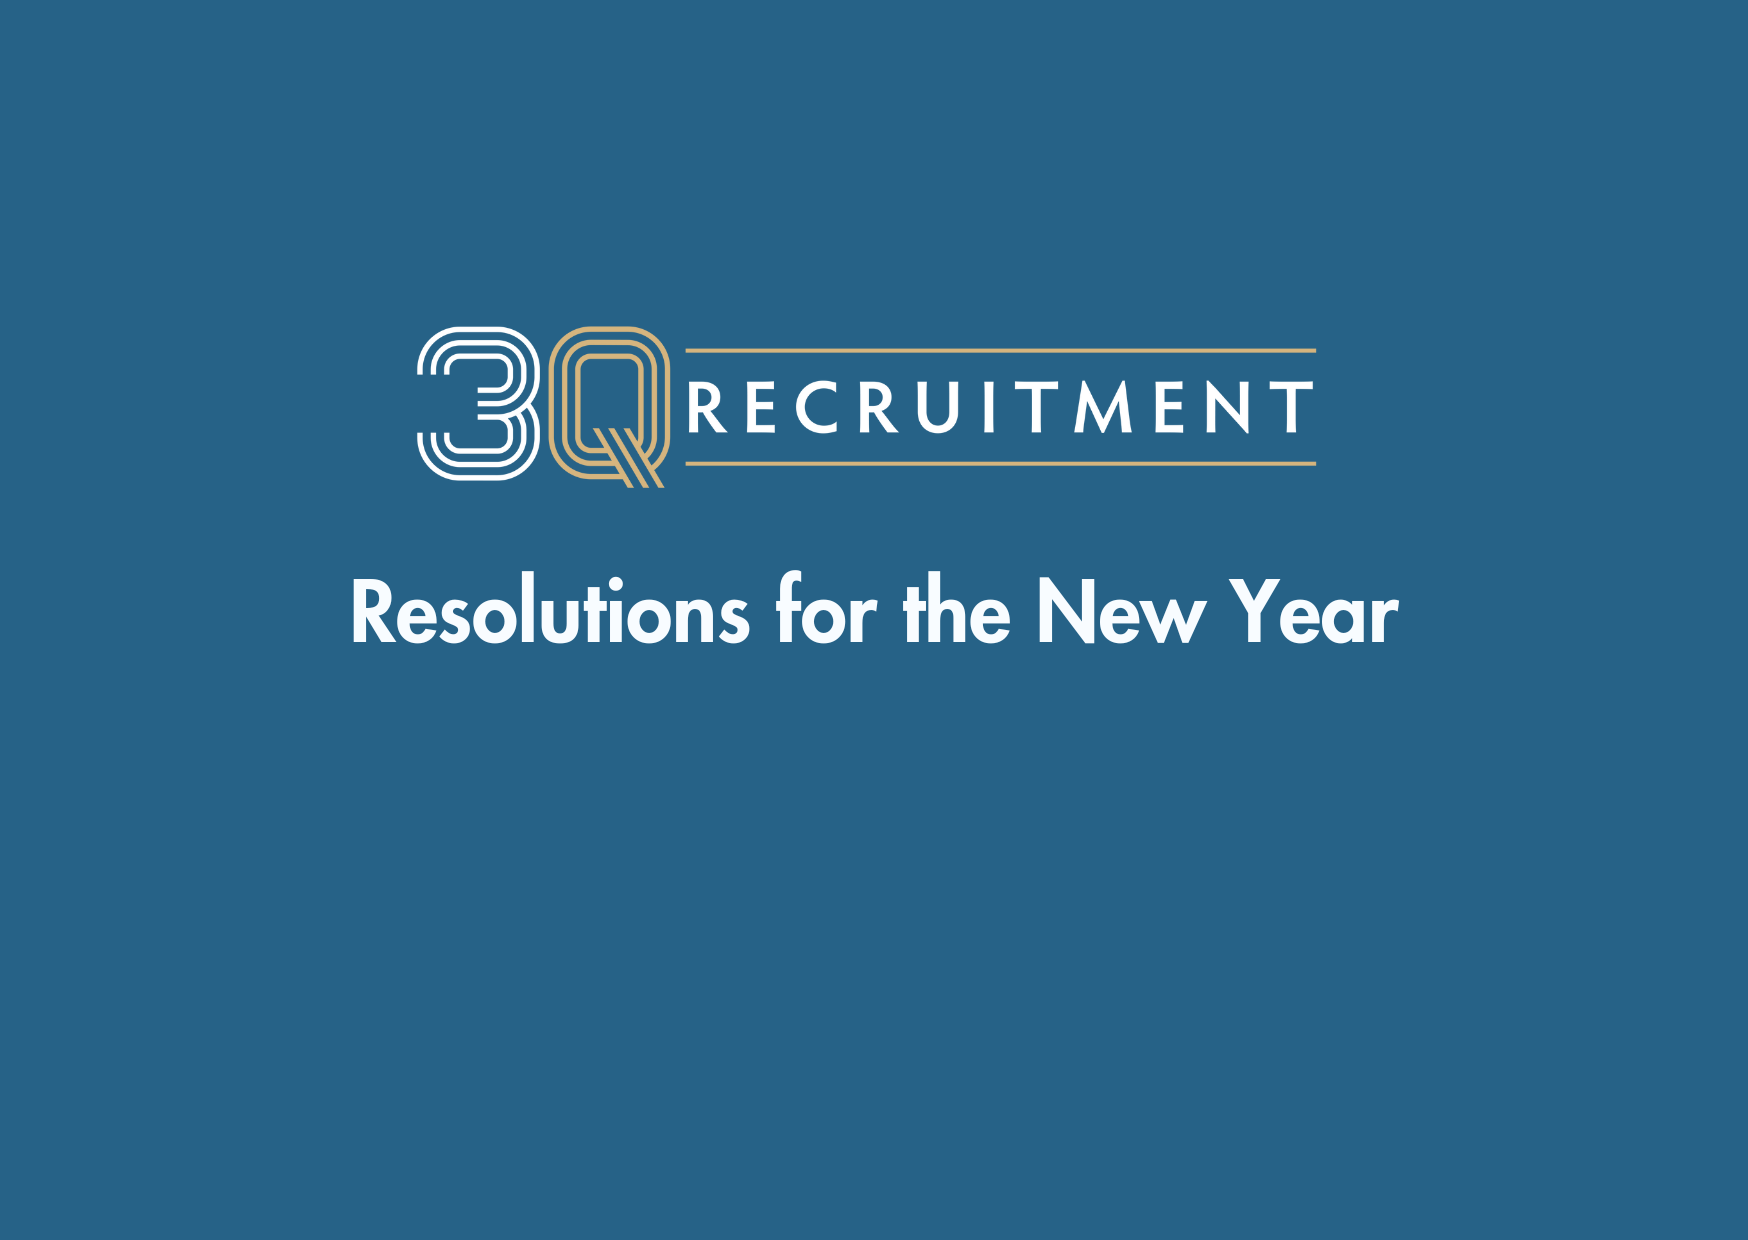 3Q Recruitment Resolutions for the New Year